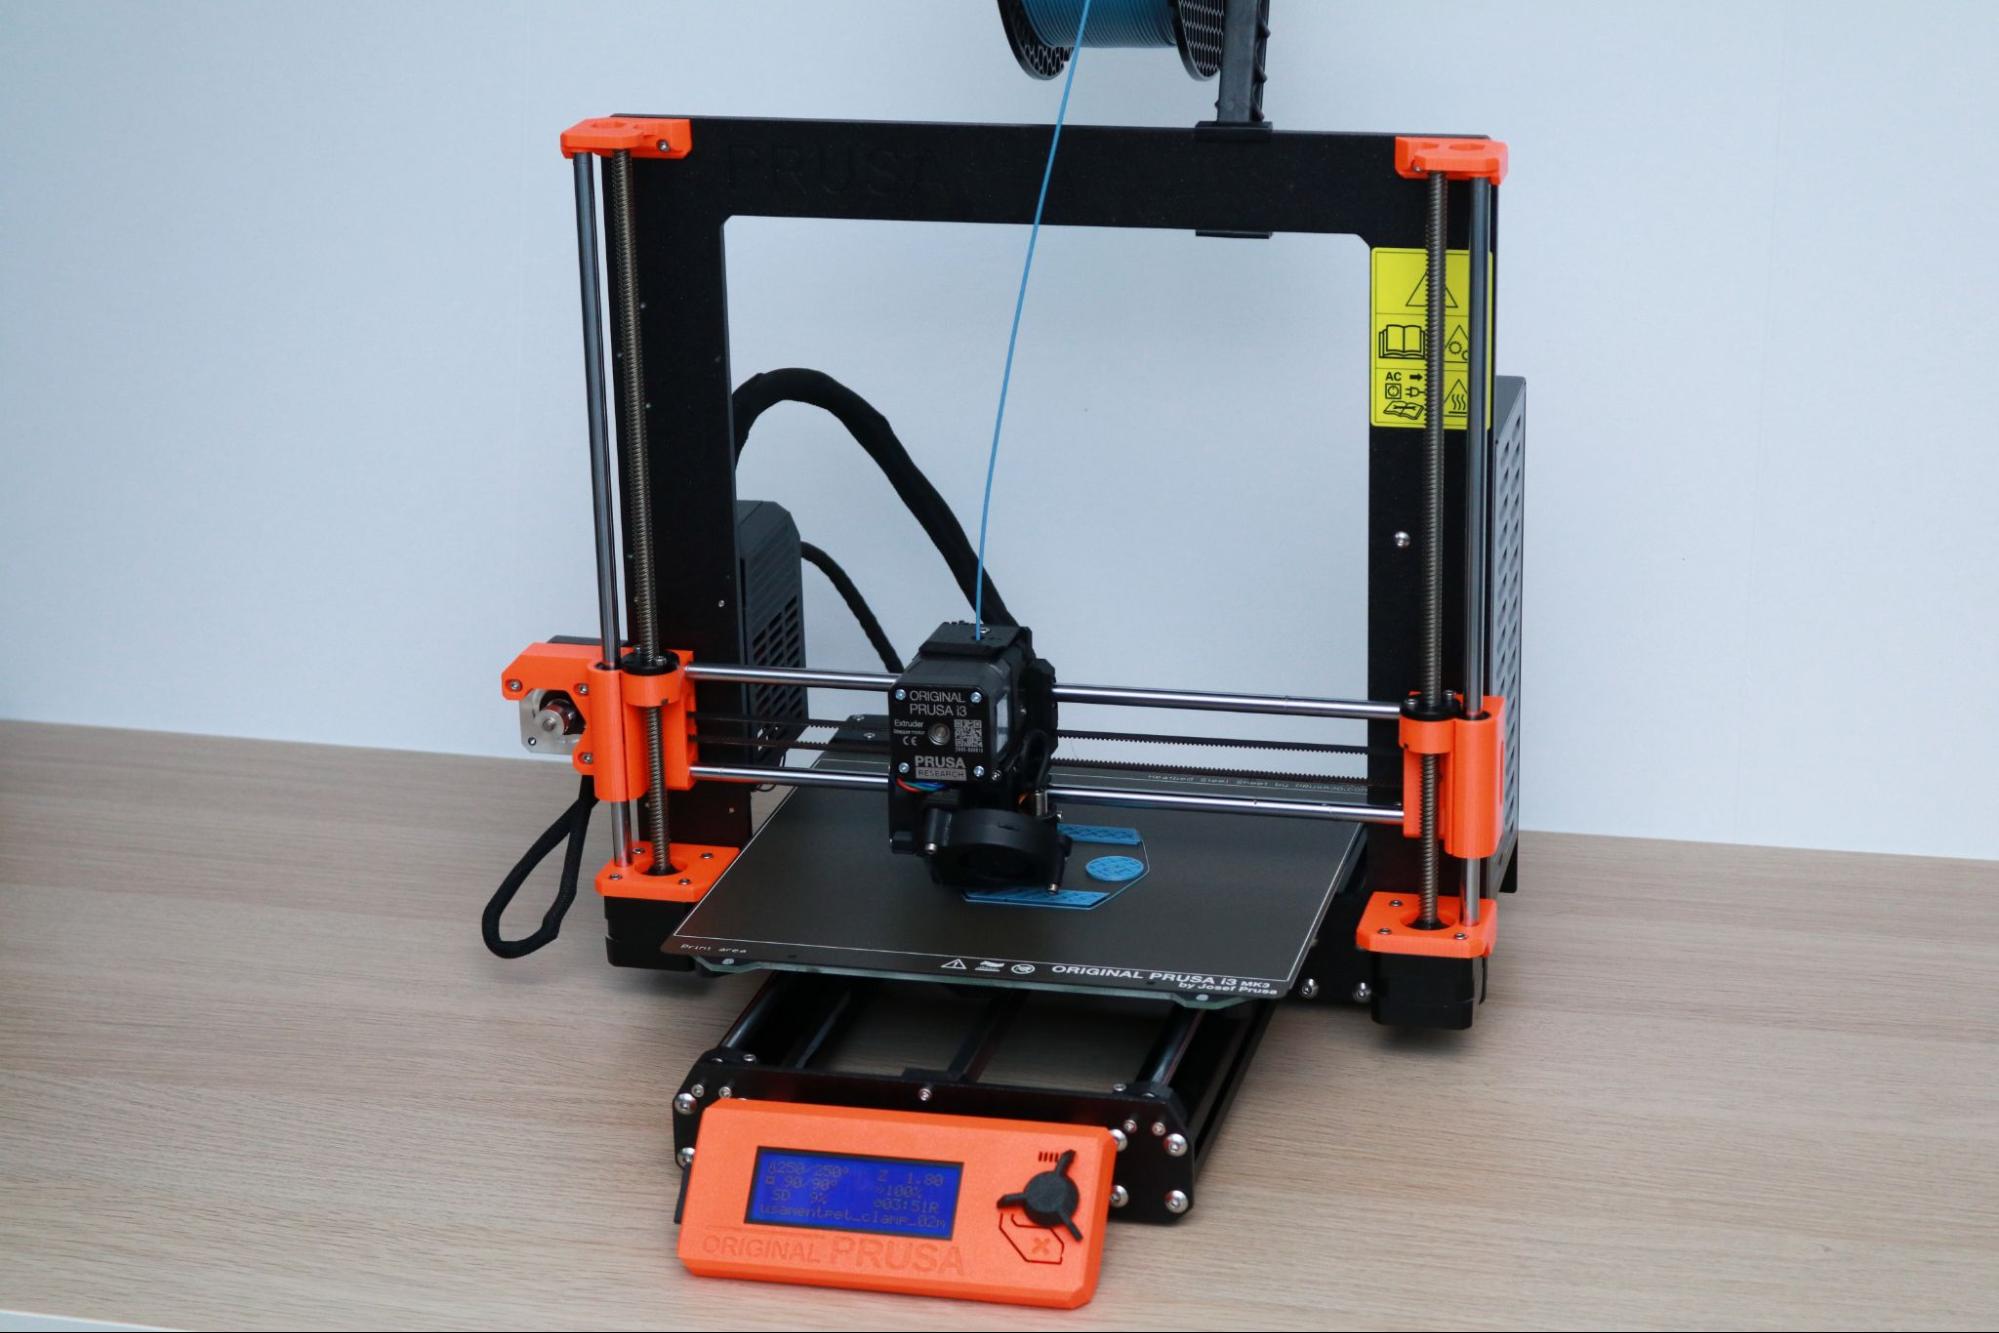 How To Use A Prusa 3D Printer